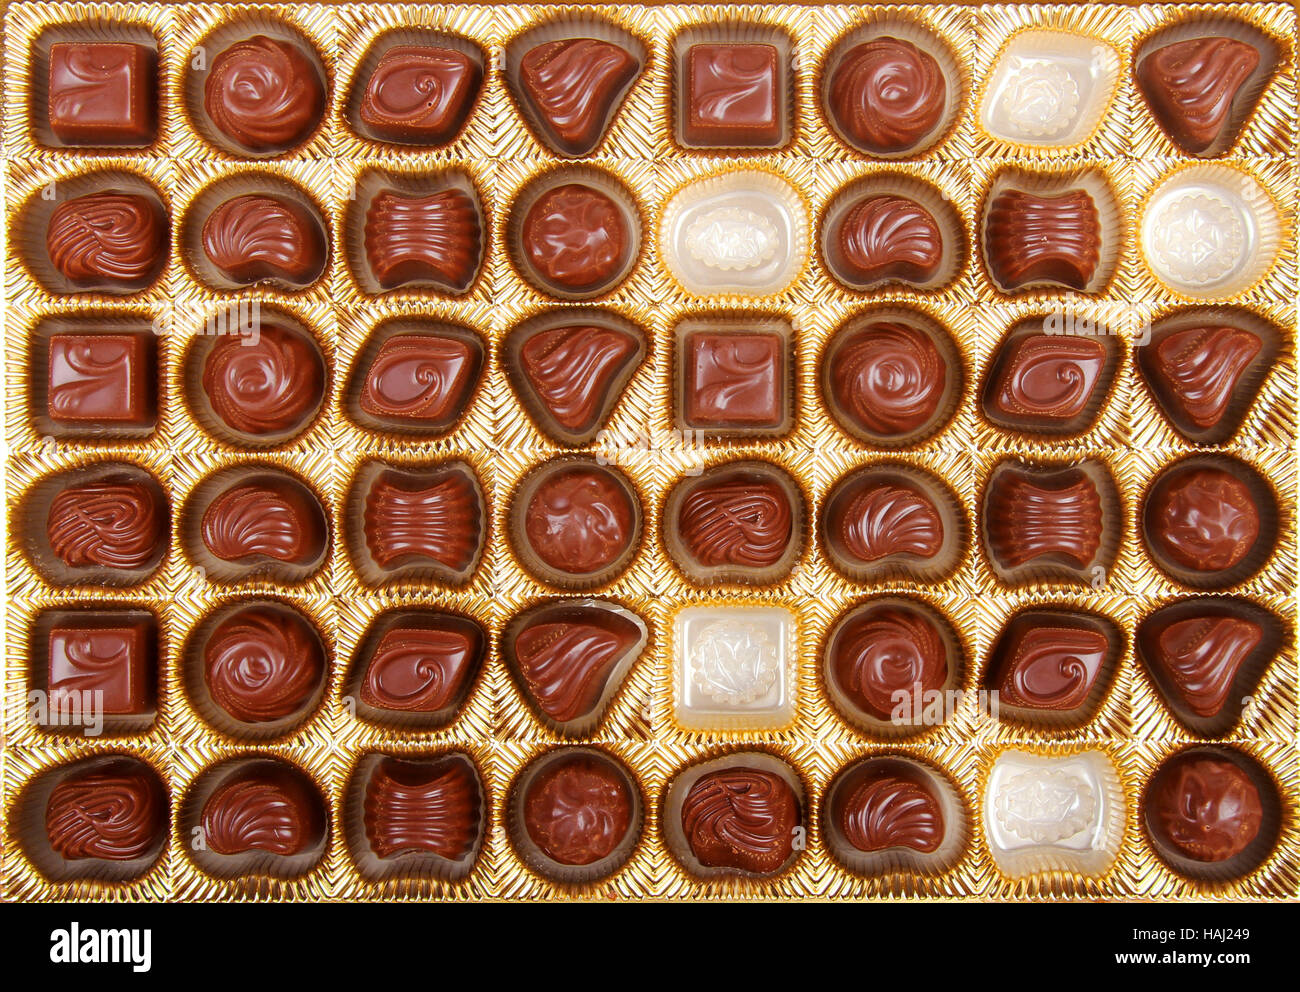 variation of chocolate candy in the box Stock Photo